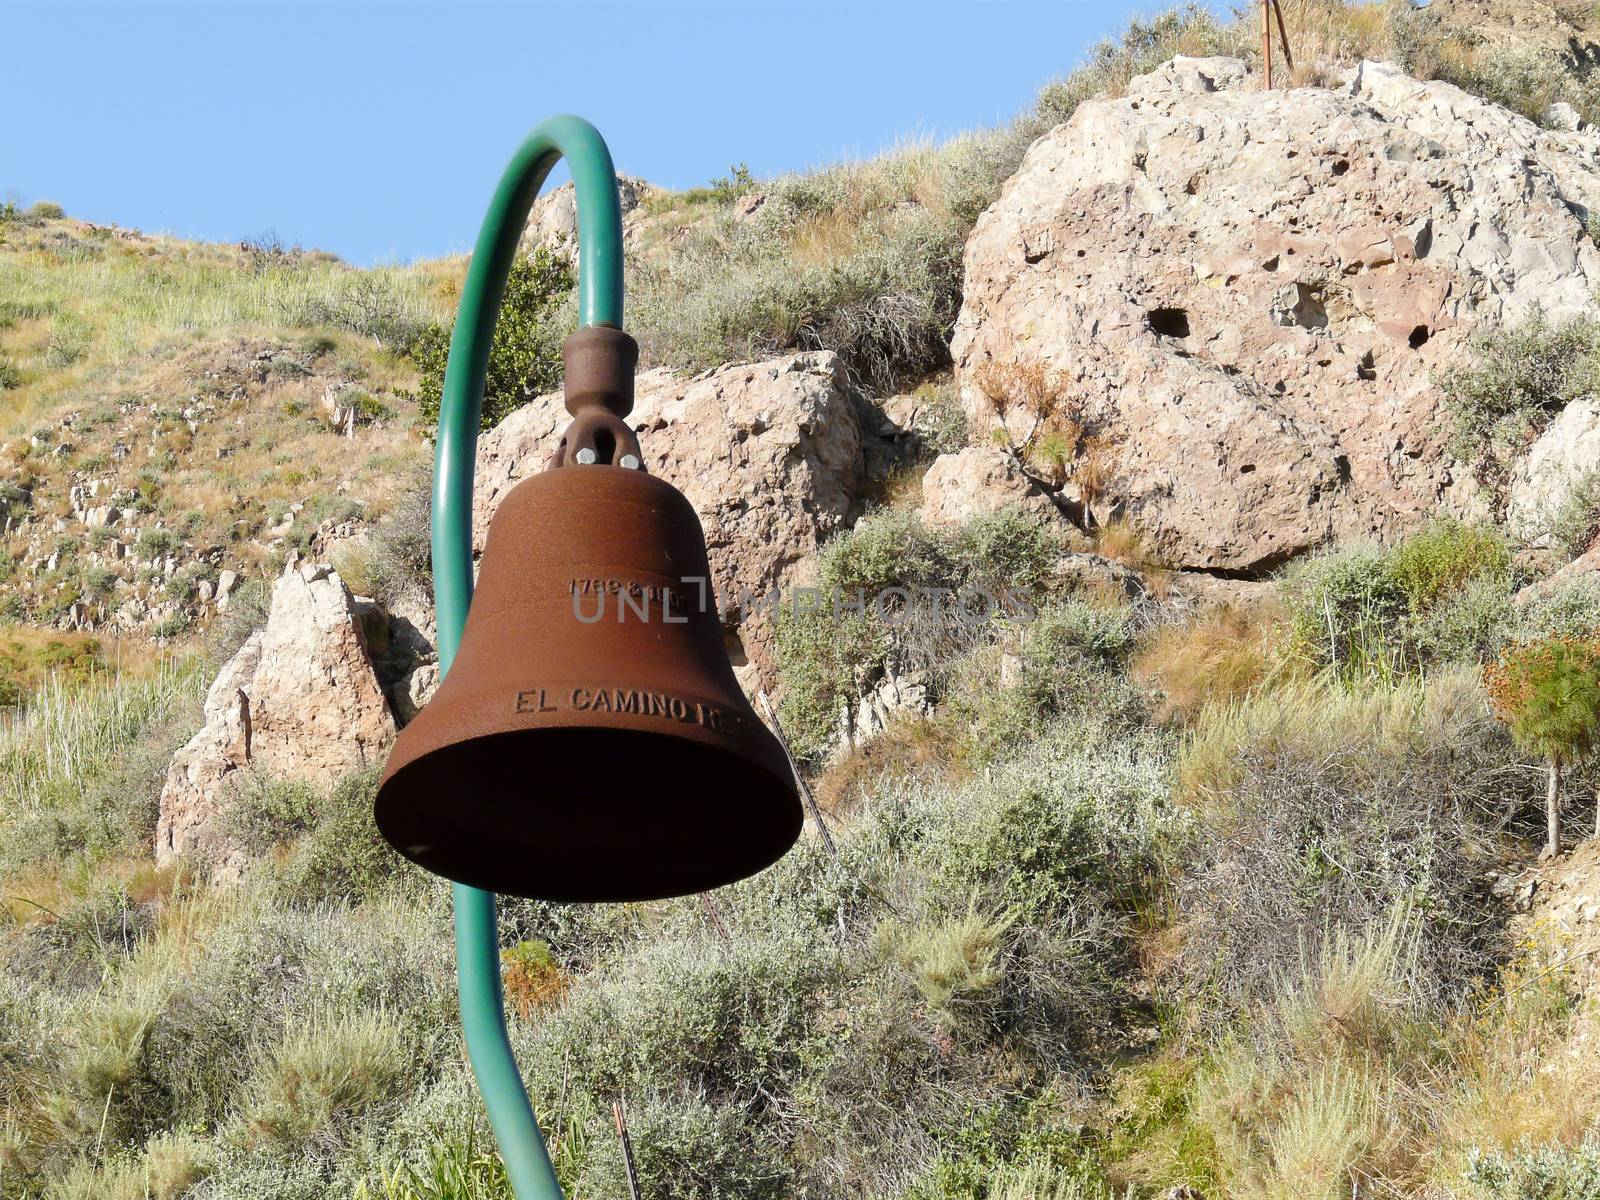 El Camino Real Bell by wit_gorski